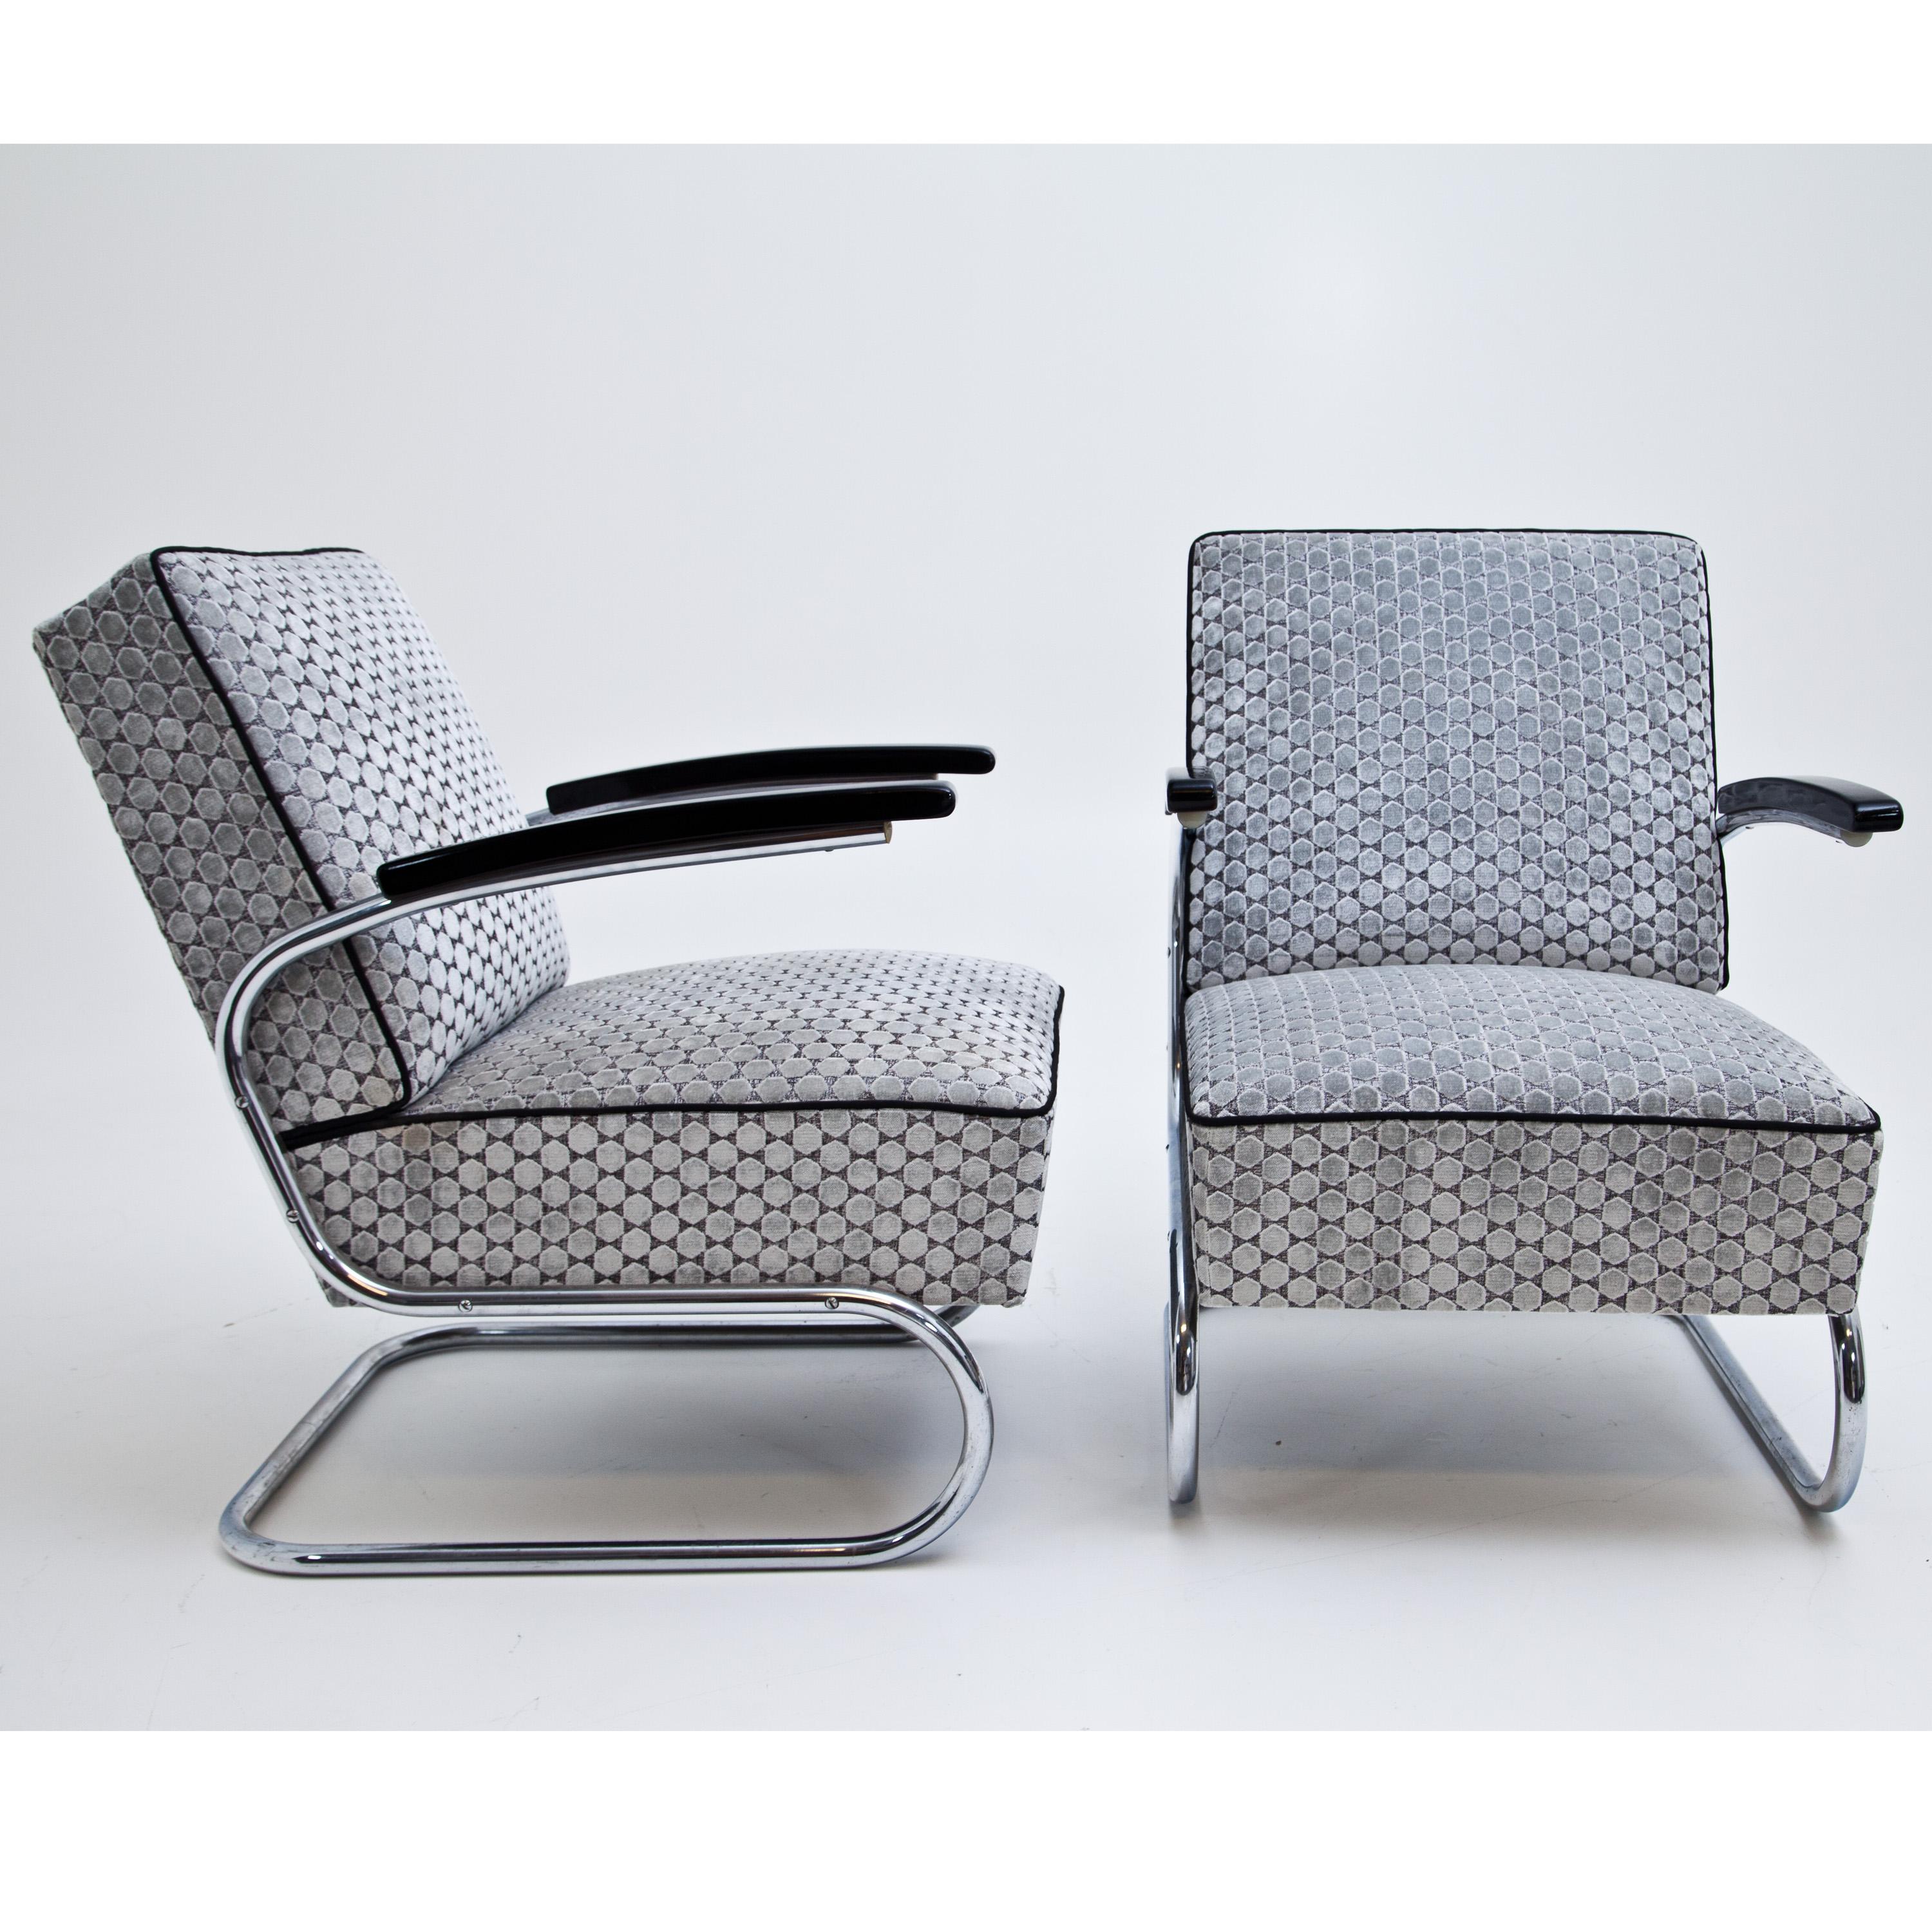 Pair of armchairs after Thonet’s S411 with S-shaped bent tubular steel frame and wooden armrests. The thickly upholstered seats and backrests are newly upholstered with a high quality patterned grey fabric.